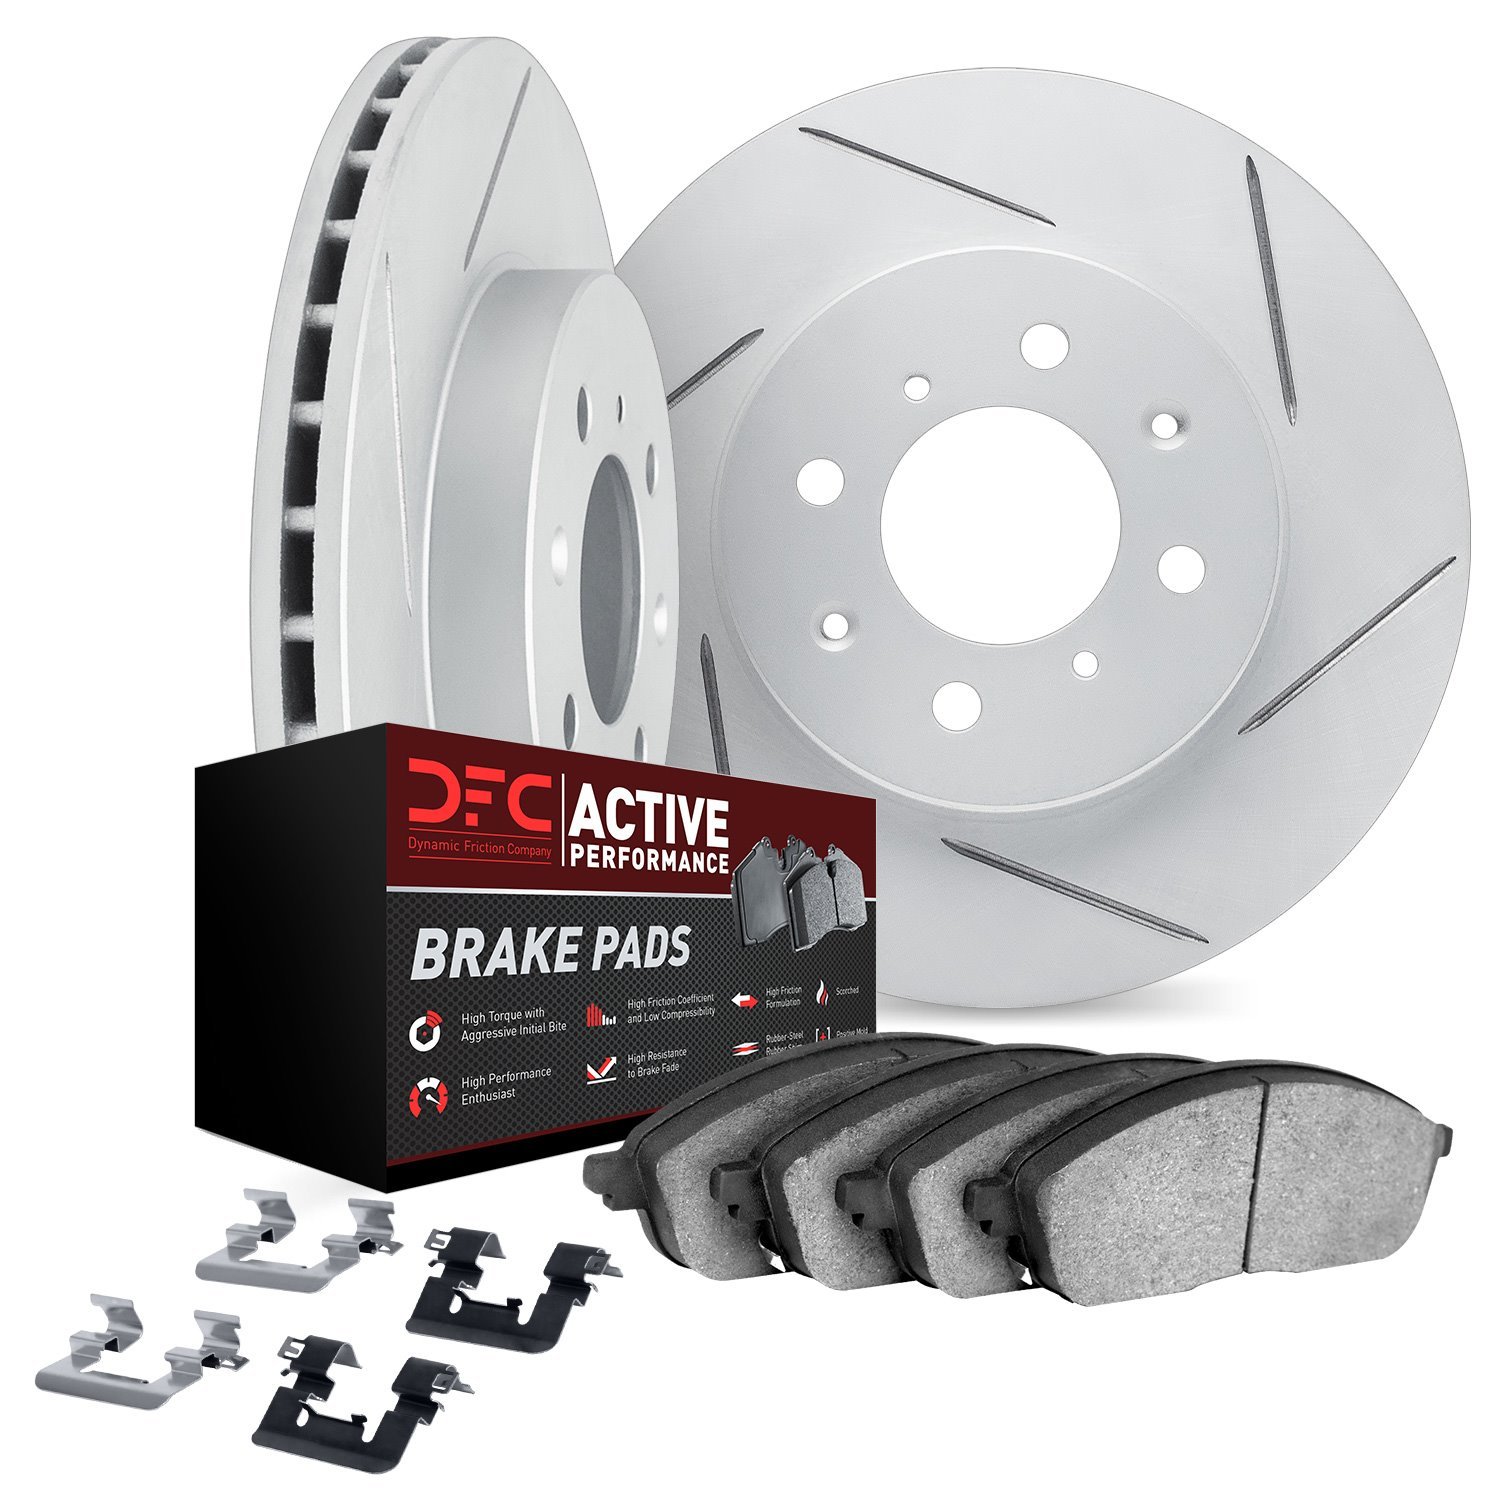 2712-67055 Geoperformance Slotted Brake Rotors with Active Performance Pads Kits & Hardware, 2007-2012 Infiniti/Nissan, Position